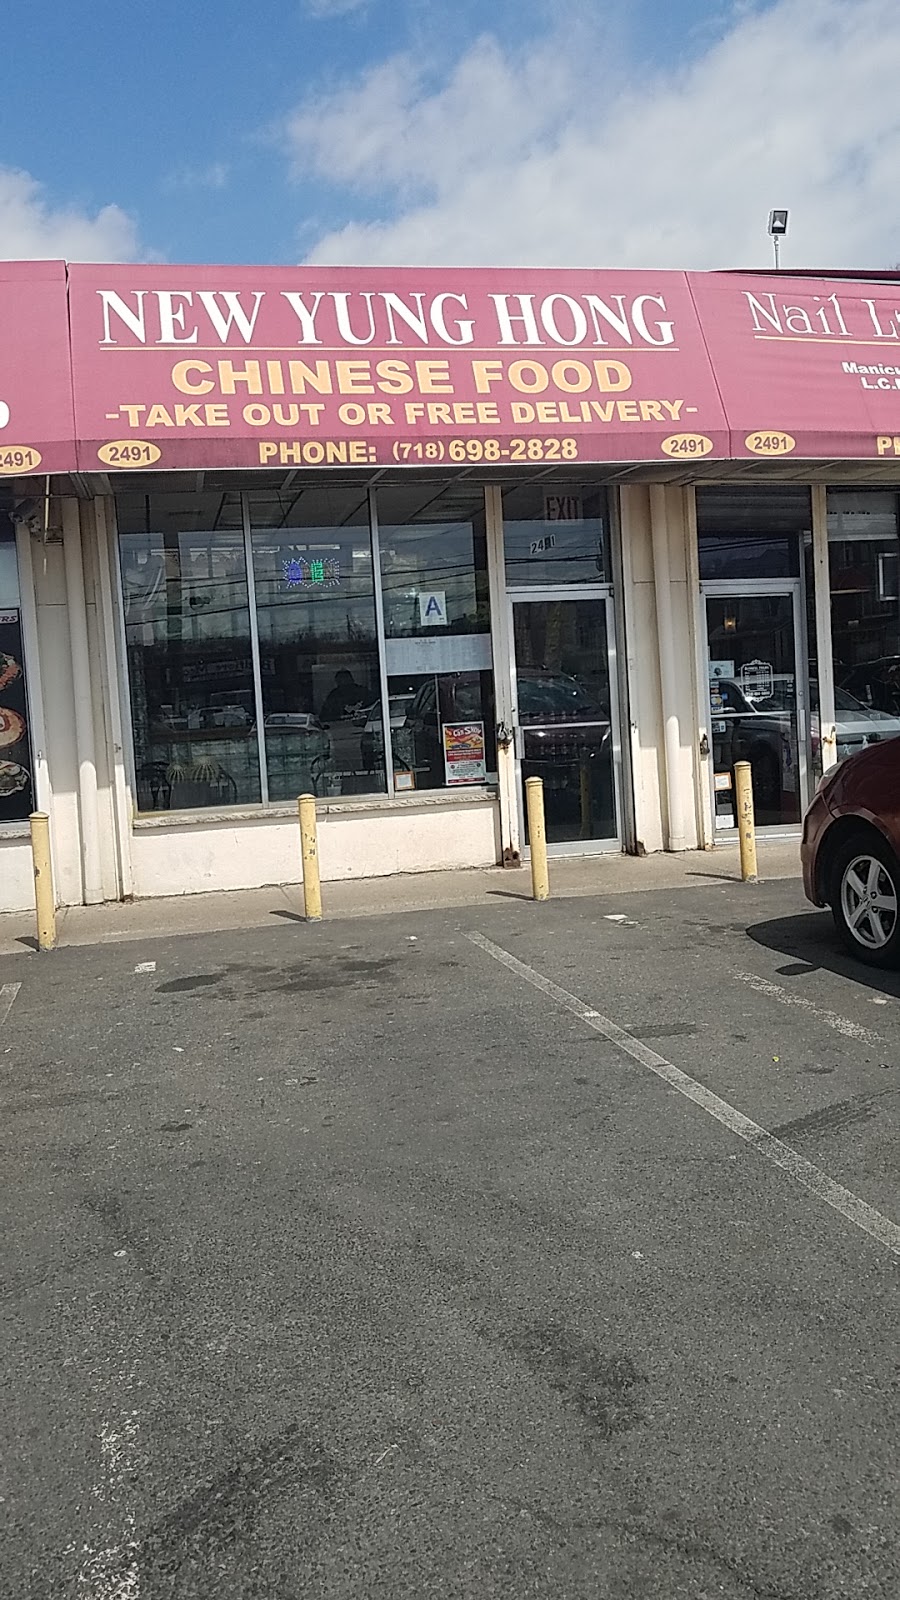 New Yung Hong Chinese Takeout | 2491 Victory Blvd, Staten Island, NY 10314 | Phone: (718) 698-2828